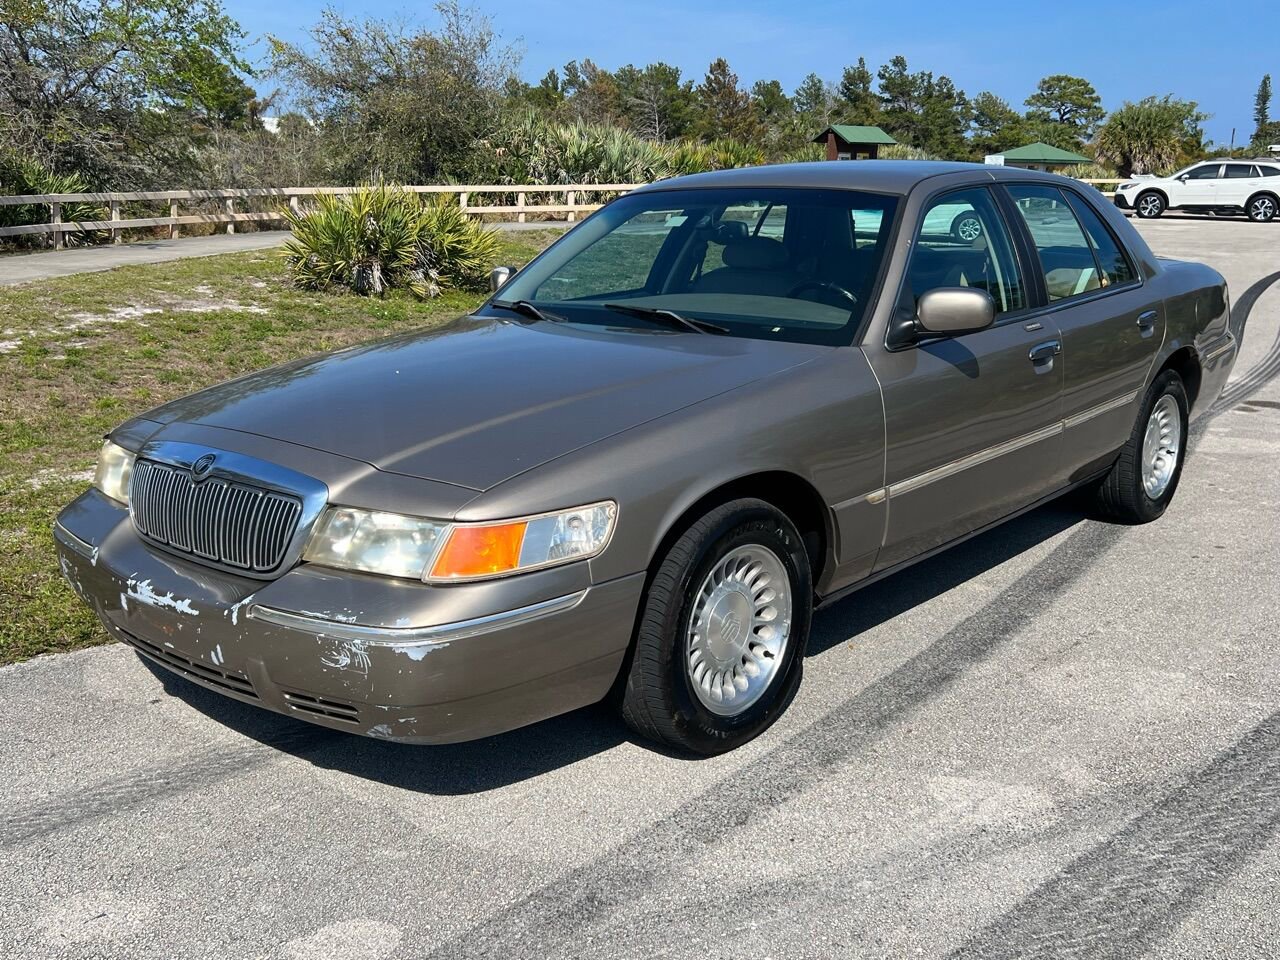 Used 2001 Mercury Grand Marquis for Sale Right Now - Autotrader